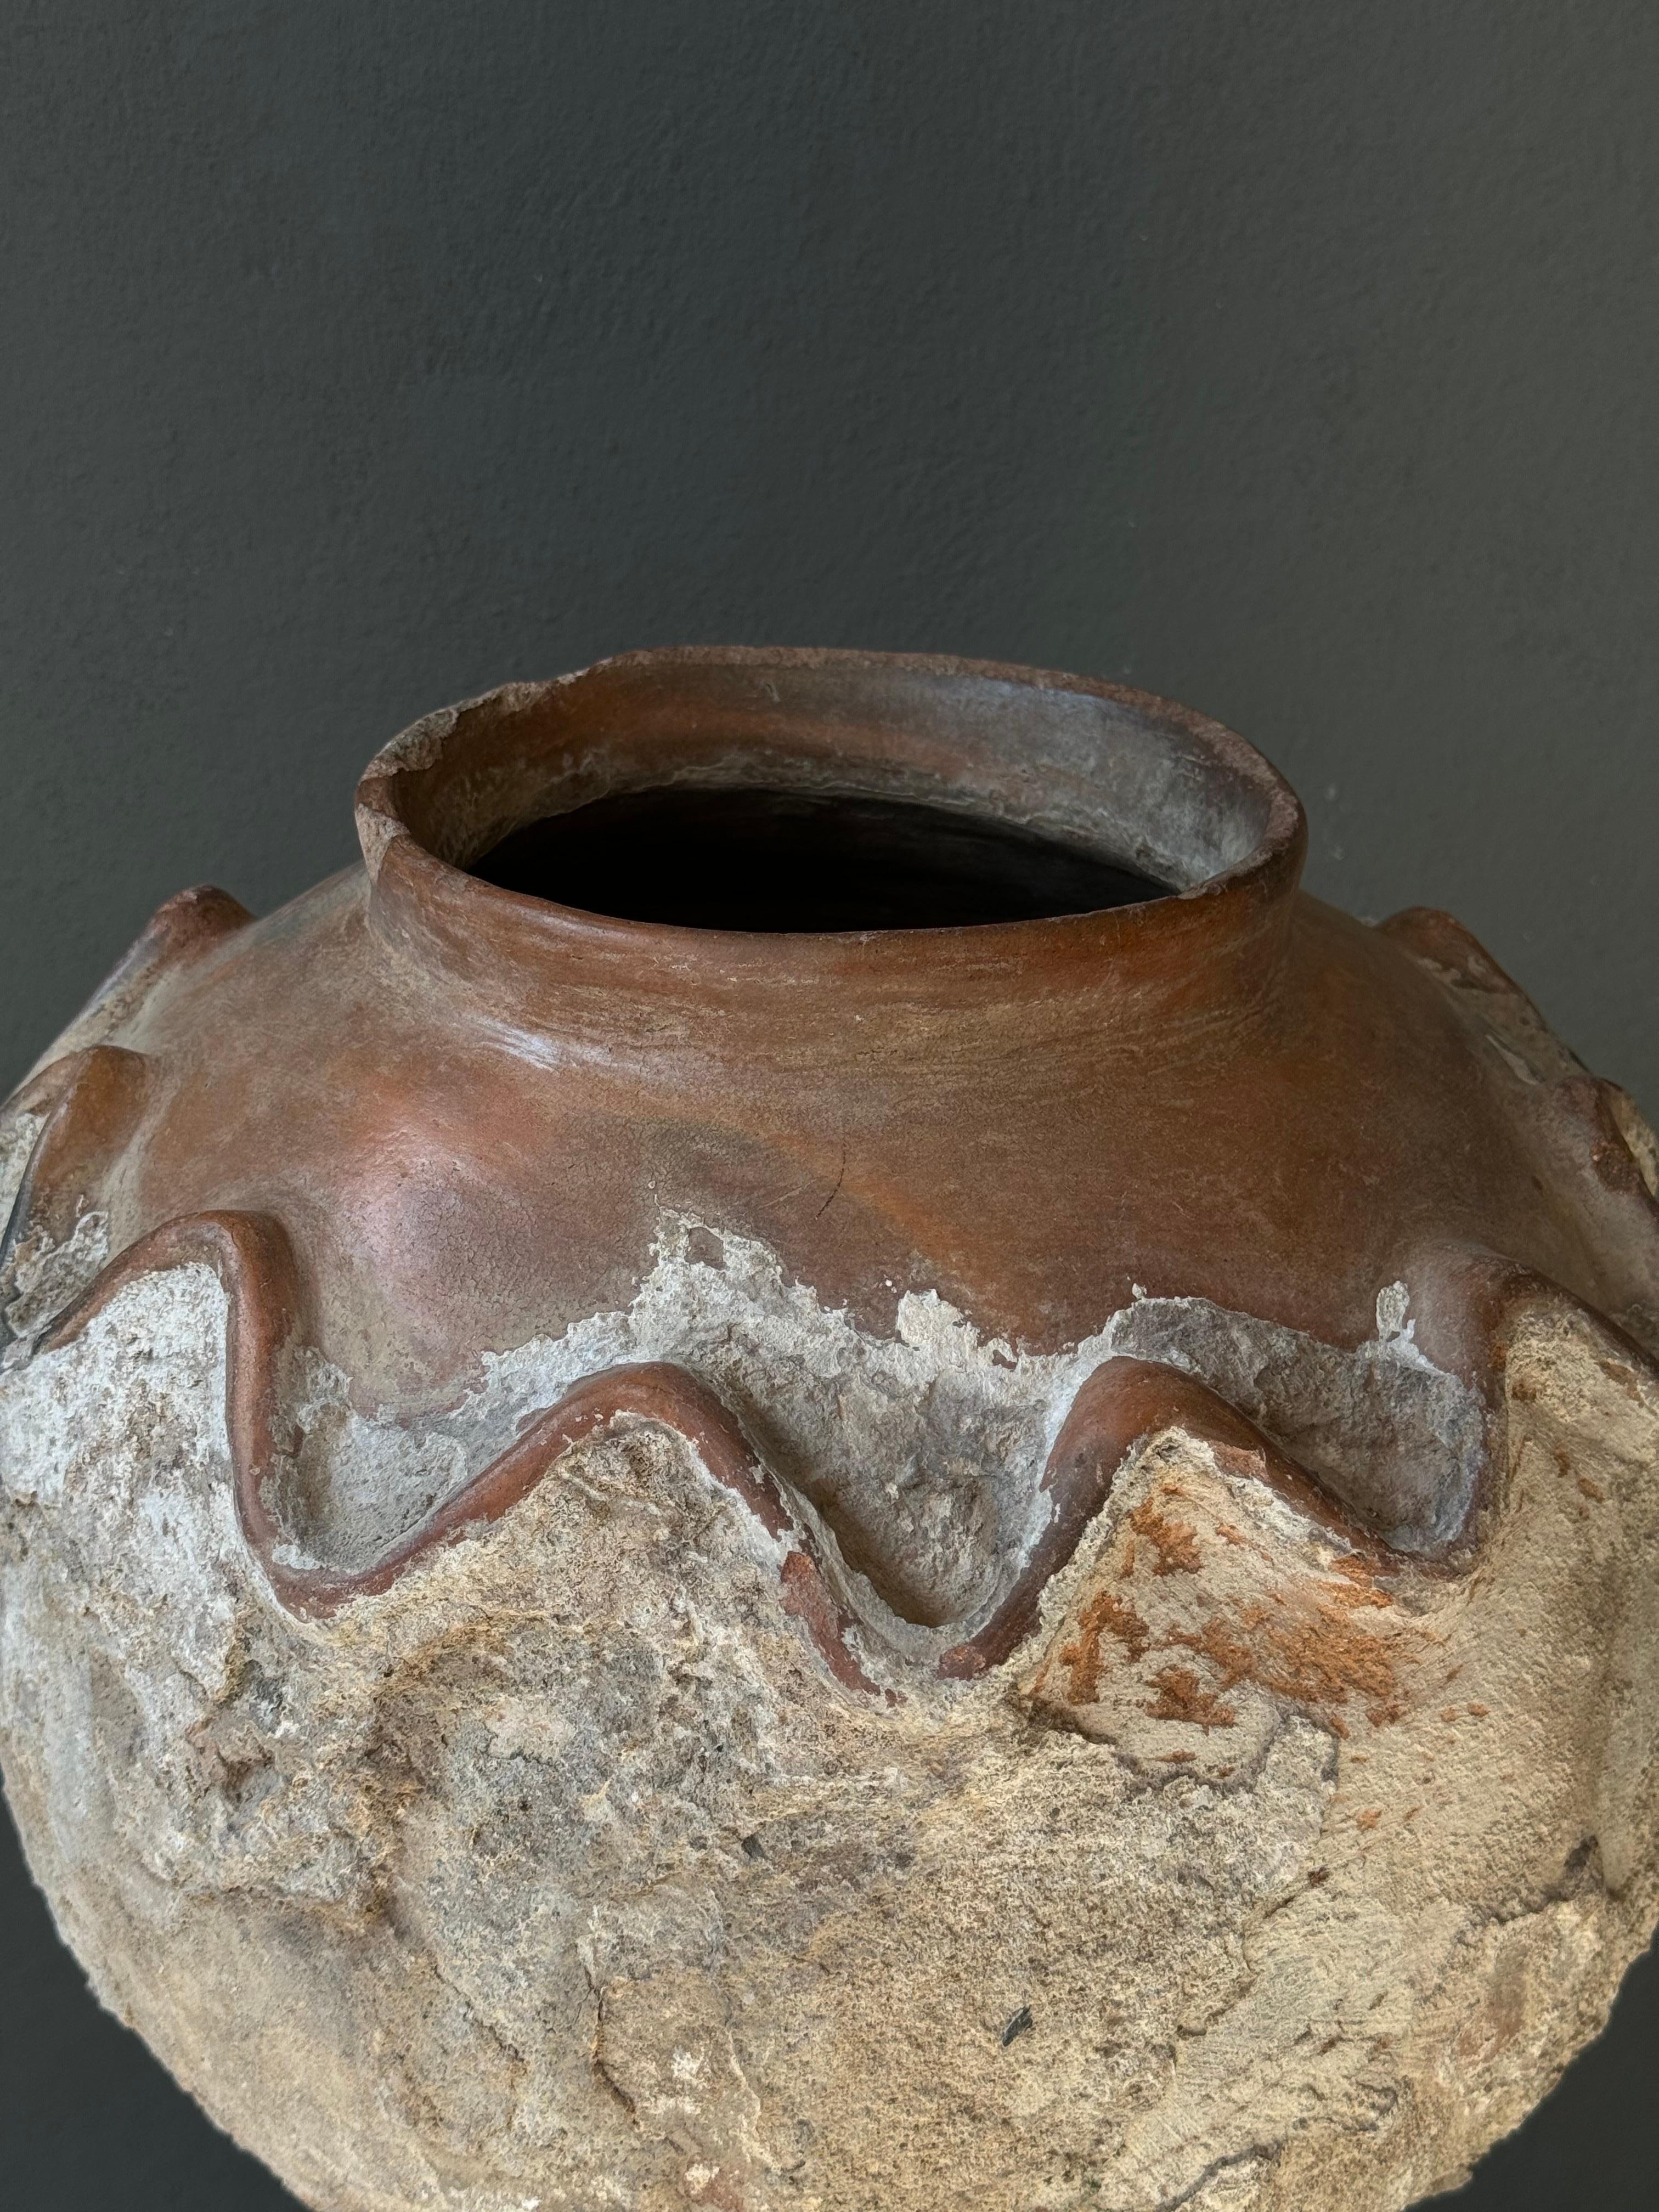 Terracotta water vessel from Central Michoacan, Mexico, early 20th century. The bottom half of the pot has been covered in cement for protection and cooling purposes. The zig zag design stems from the Purepecha indigenous culture. Each of these